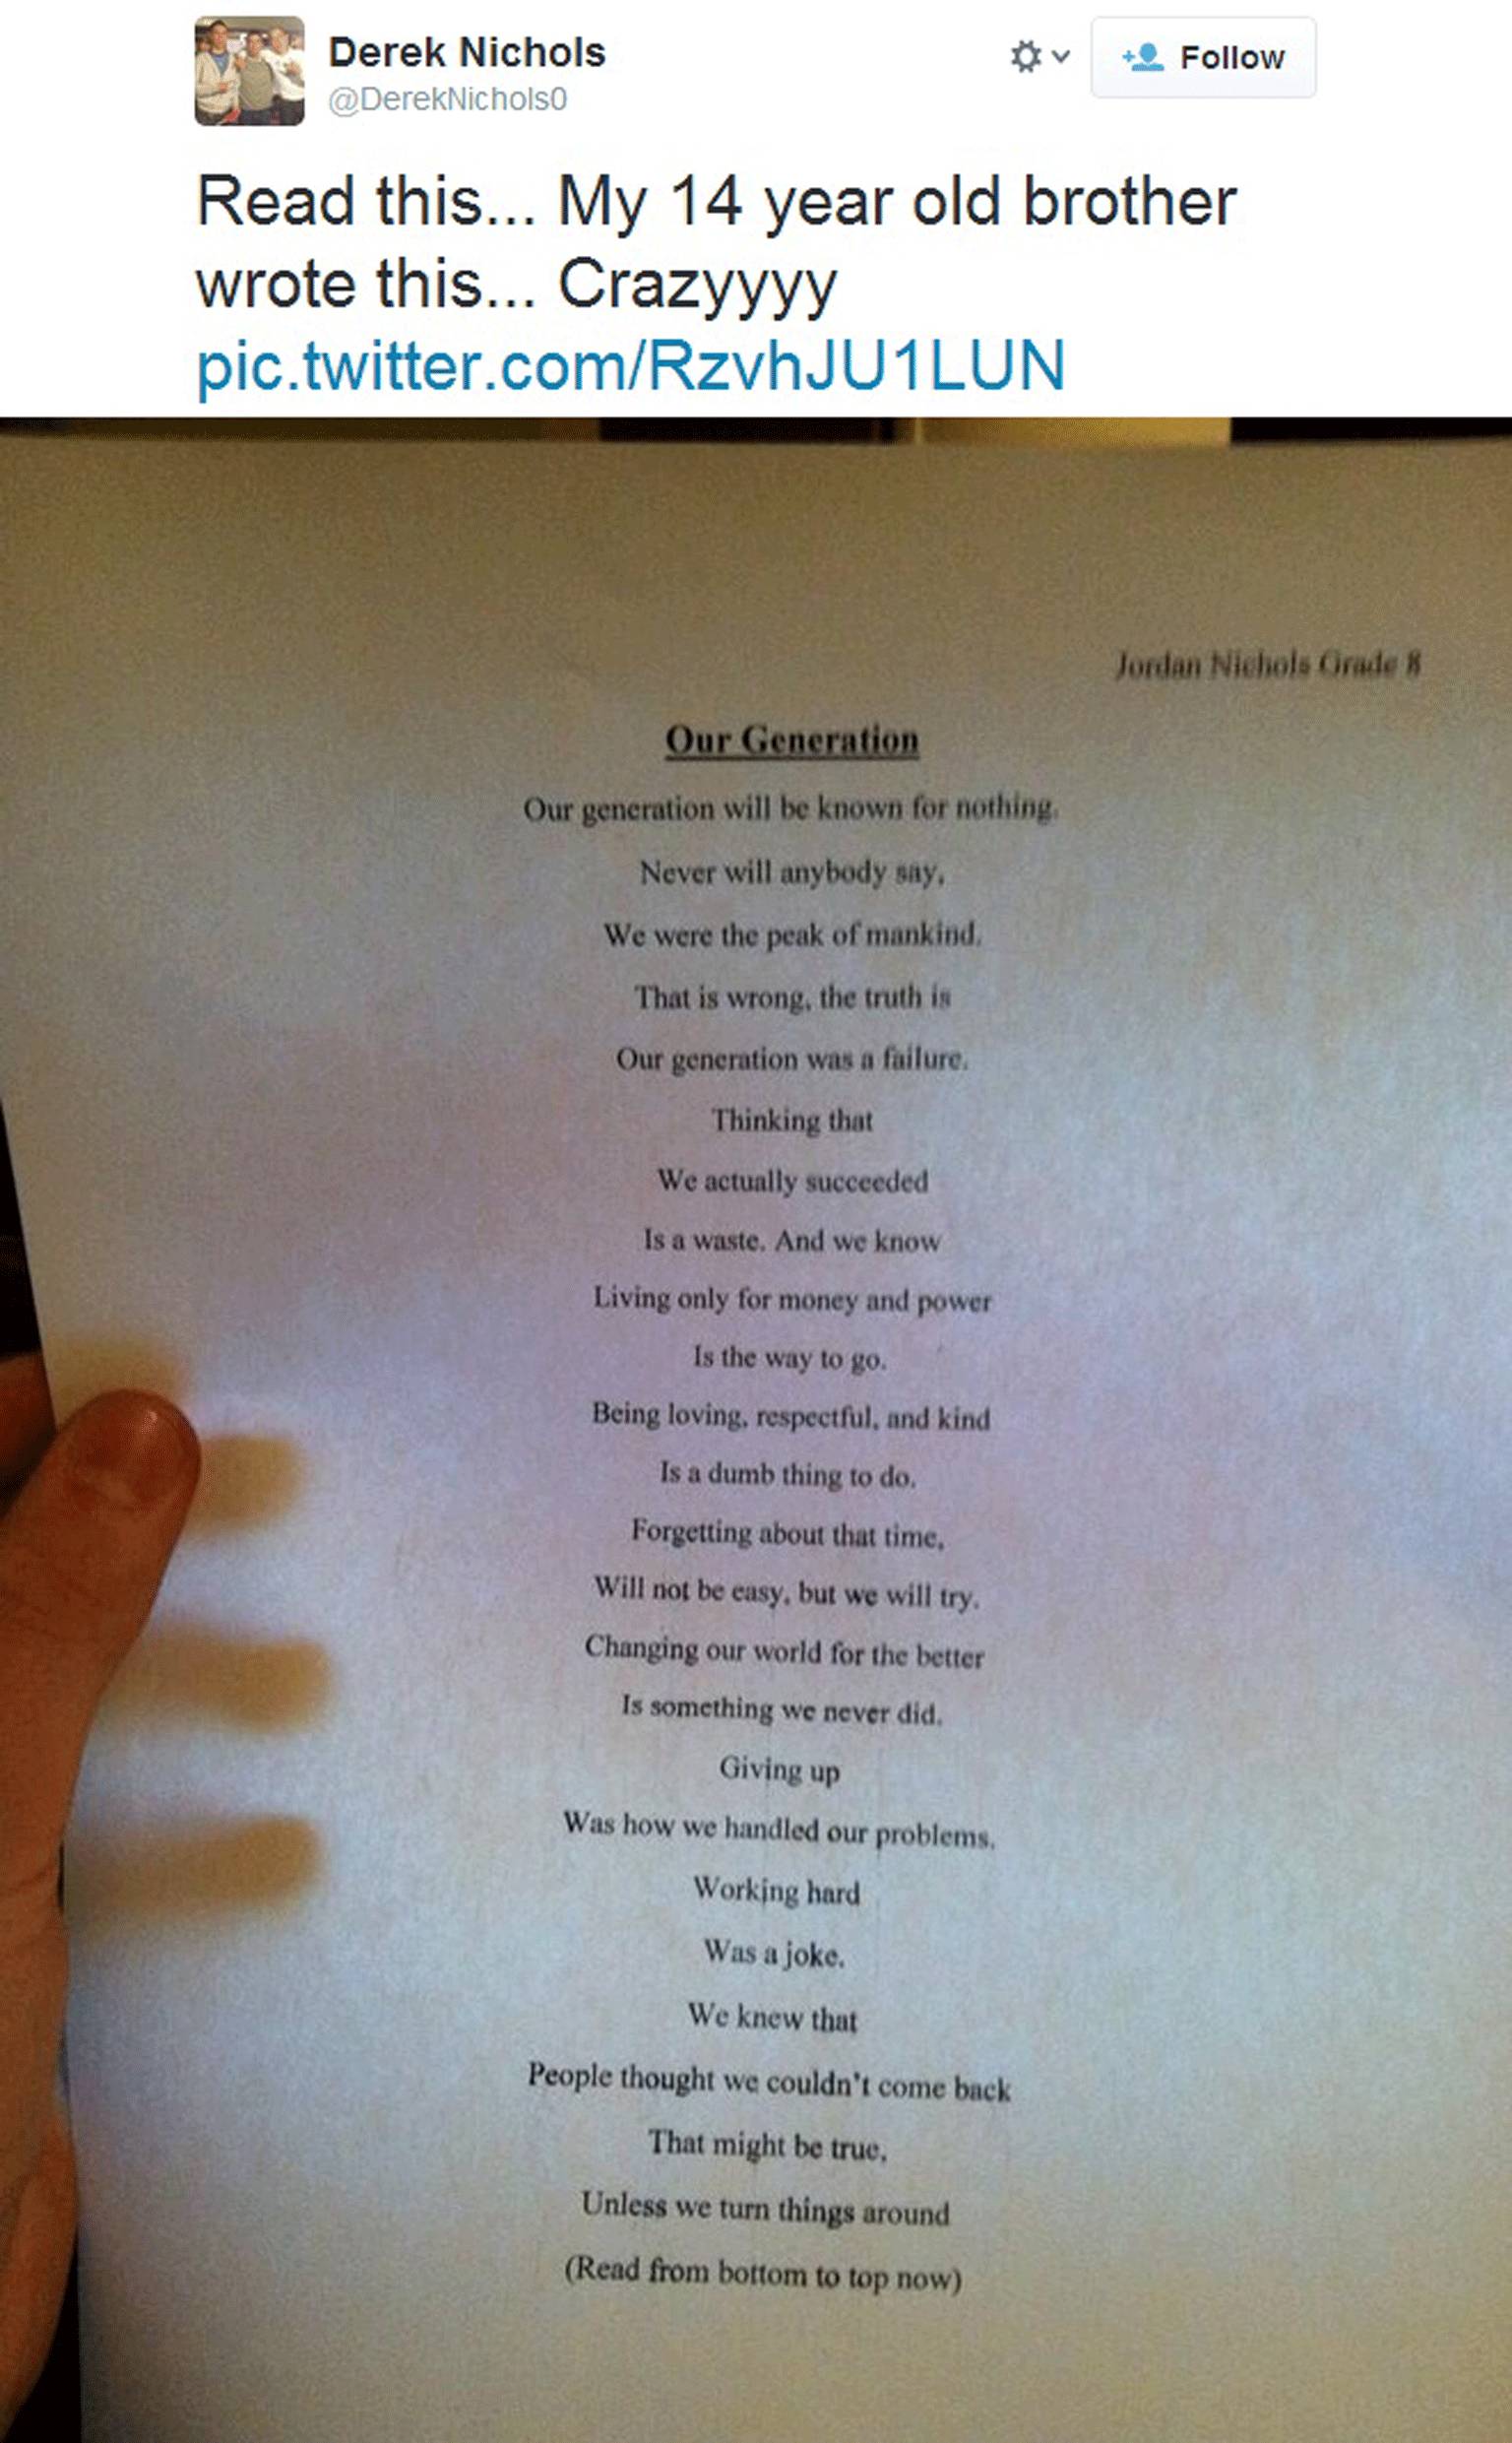 'Our Generation' was written by 8th grader Jordan